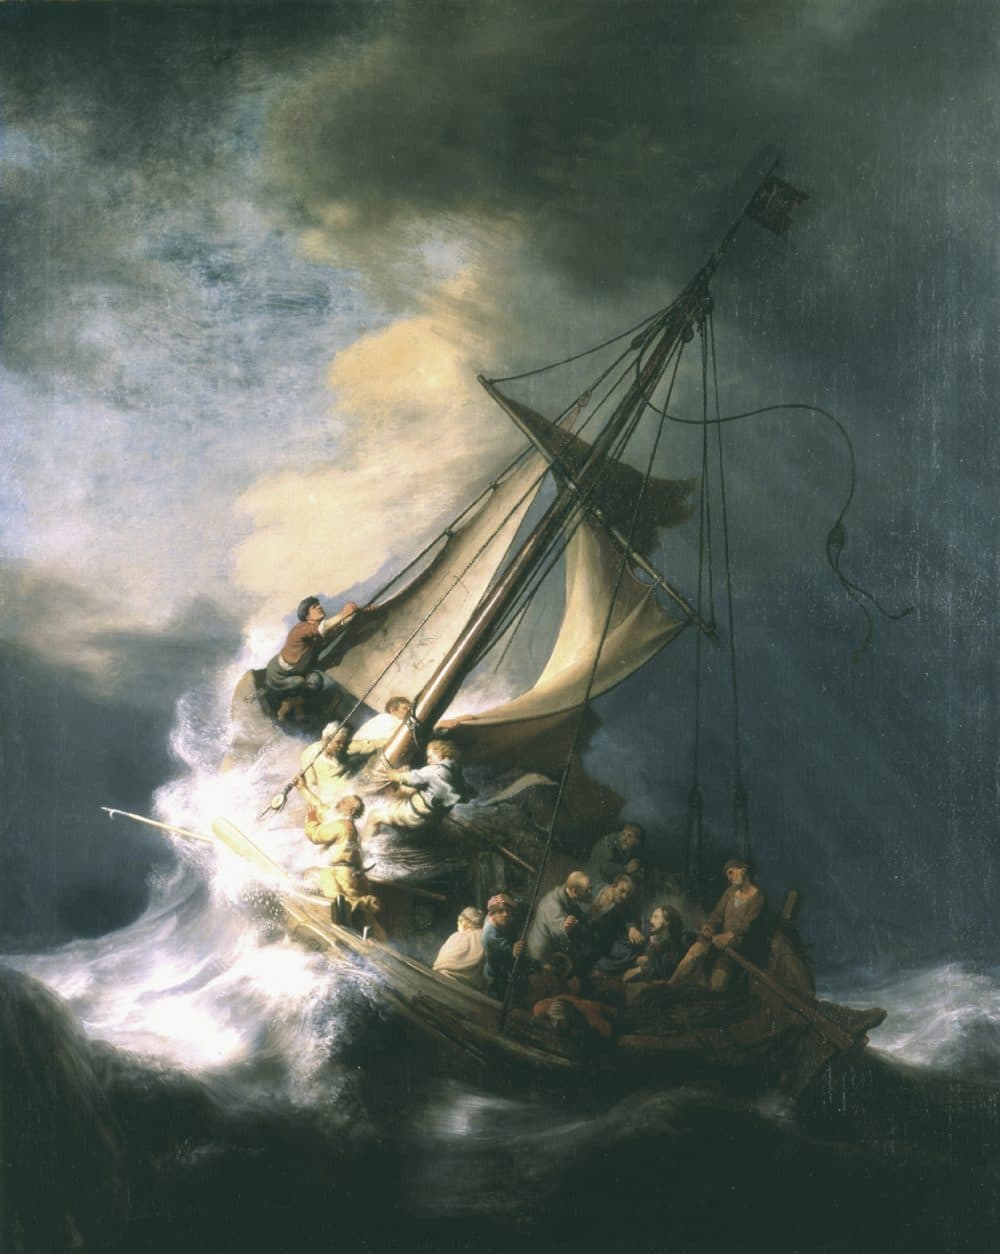 Rembrandt van Rijn's &quot;Christ In The Storm On The Sea Of Galilee,&quot; painted in 1633. Oil on canvas, 160 x 128 cm (63 x 50 3/8 in.) (Courtesy Isabella Stewart Gardner Museum)